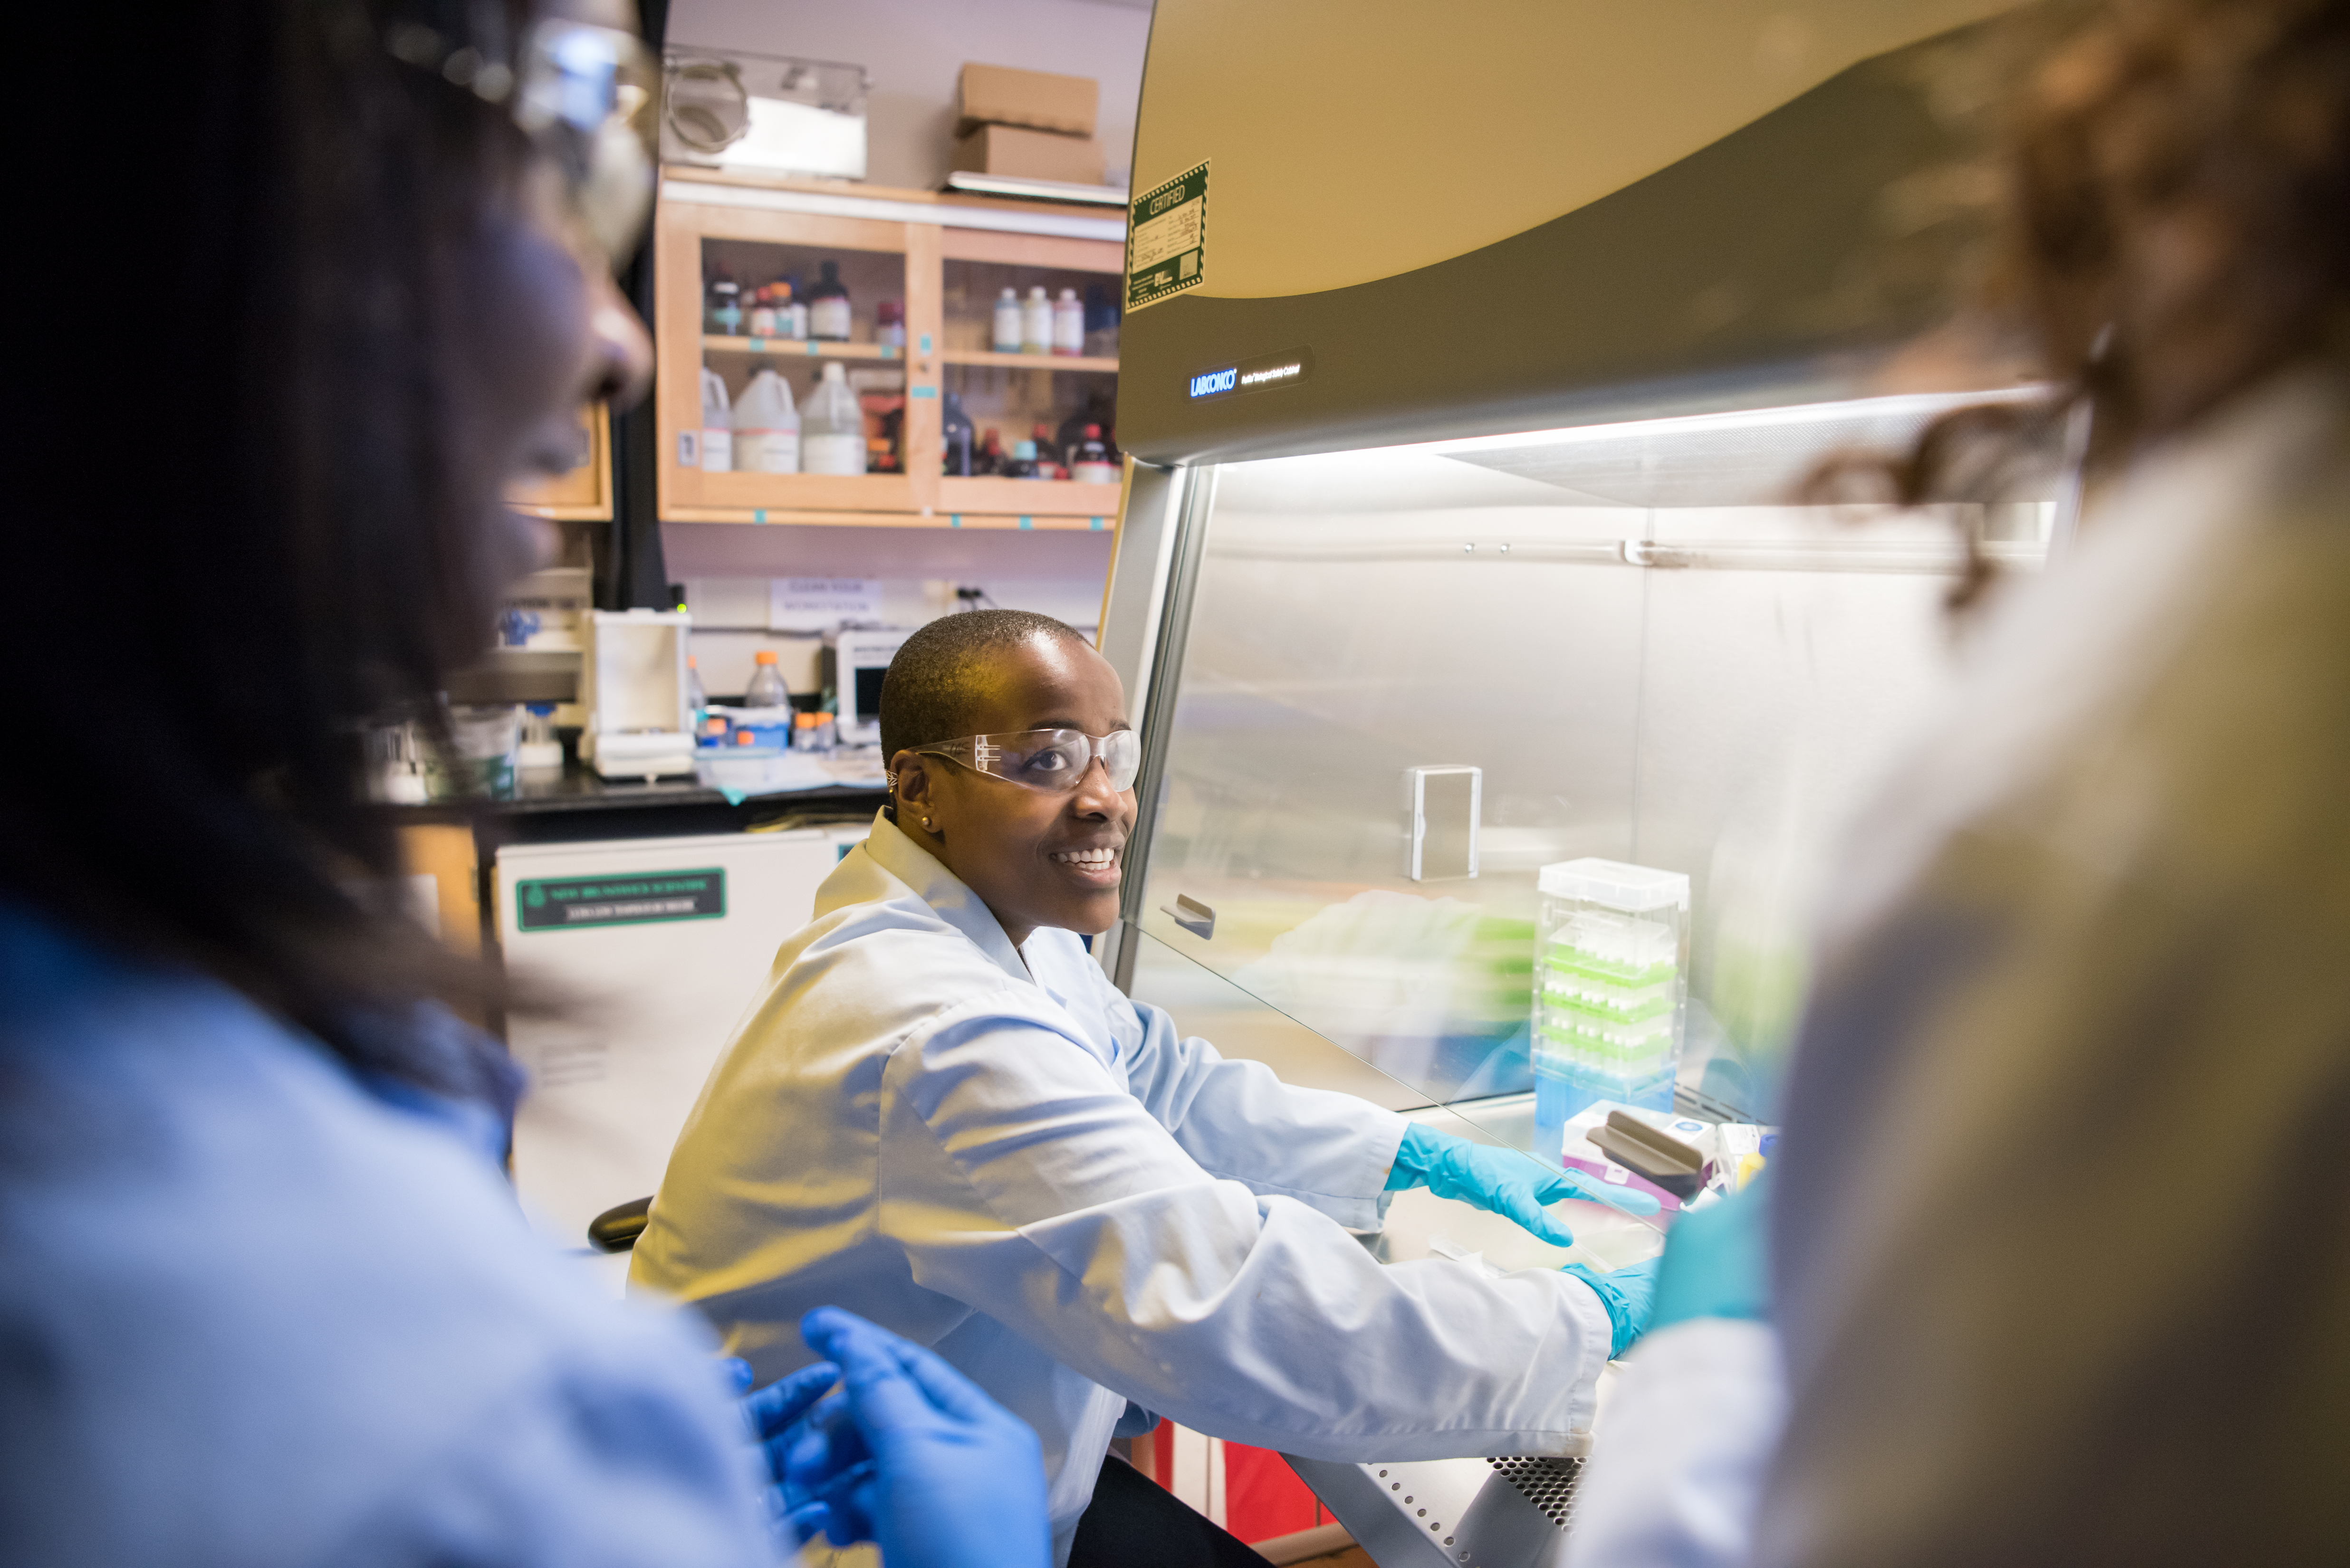 Naomi Mburu, a Class of 2018 Meyerhoff scholar, MARC U*STAR scholar and now a Rhodes scholar, works on her chemical engineering research project. Mburu was part of the UMBC's program that fosters success among underrepresented minorities in STEM.